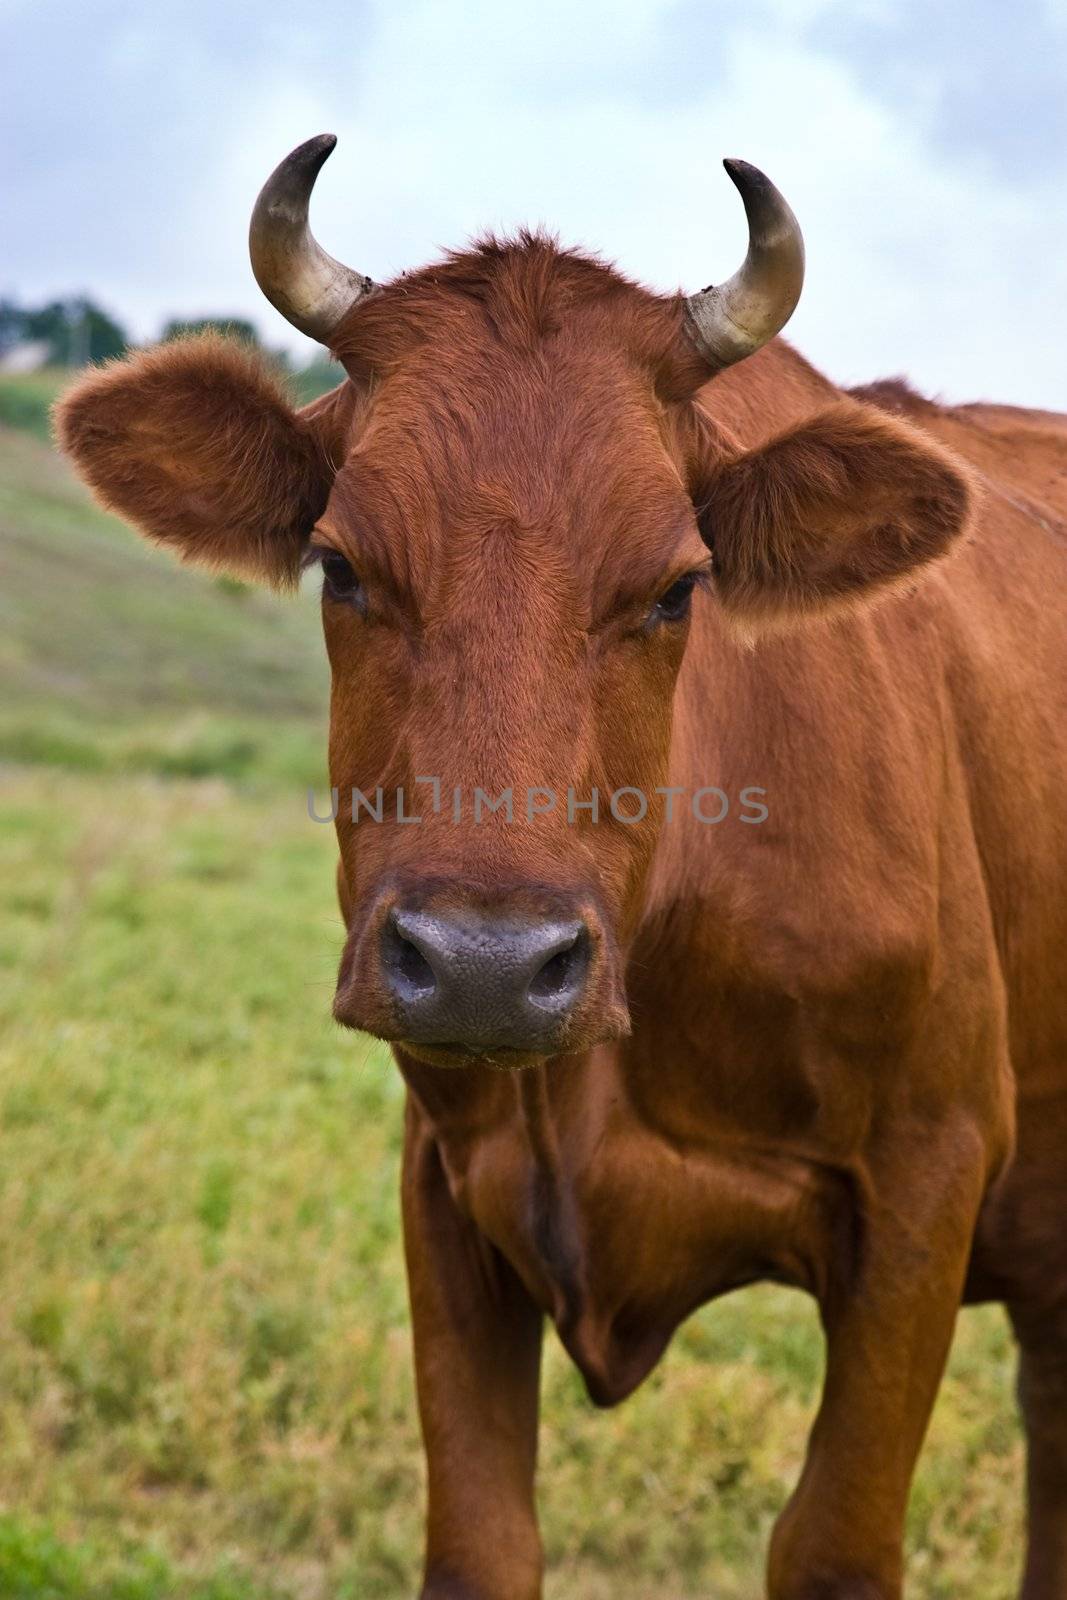 village series: portrait of cow given to butting